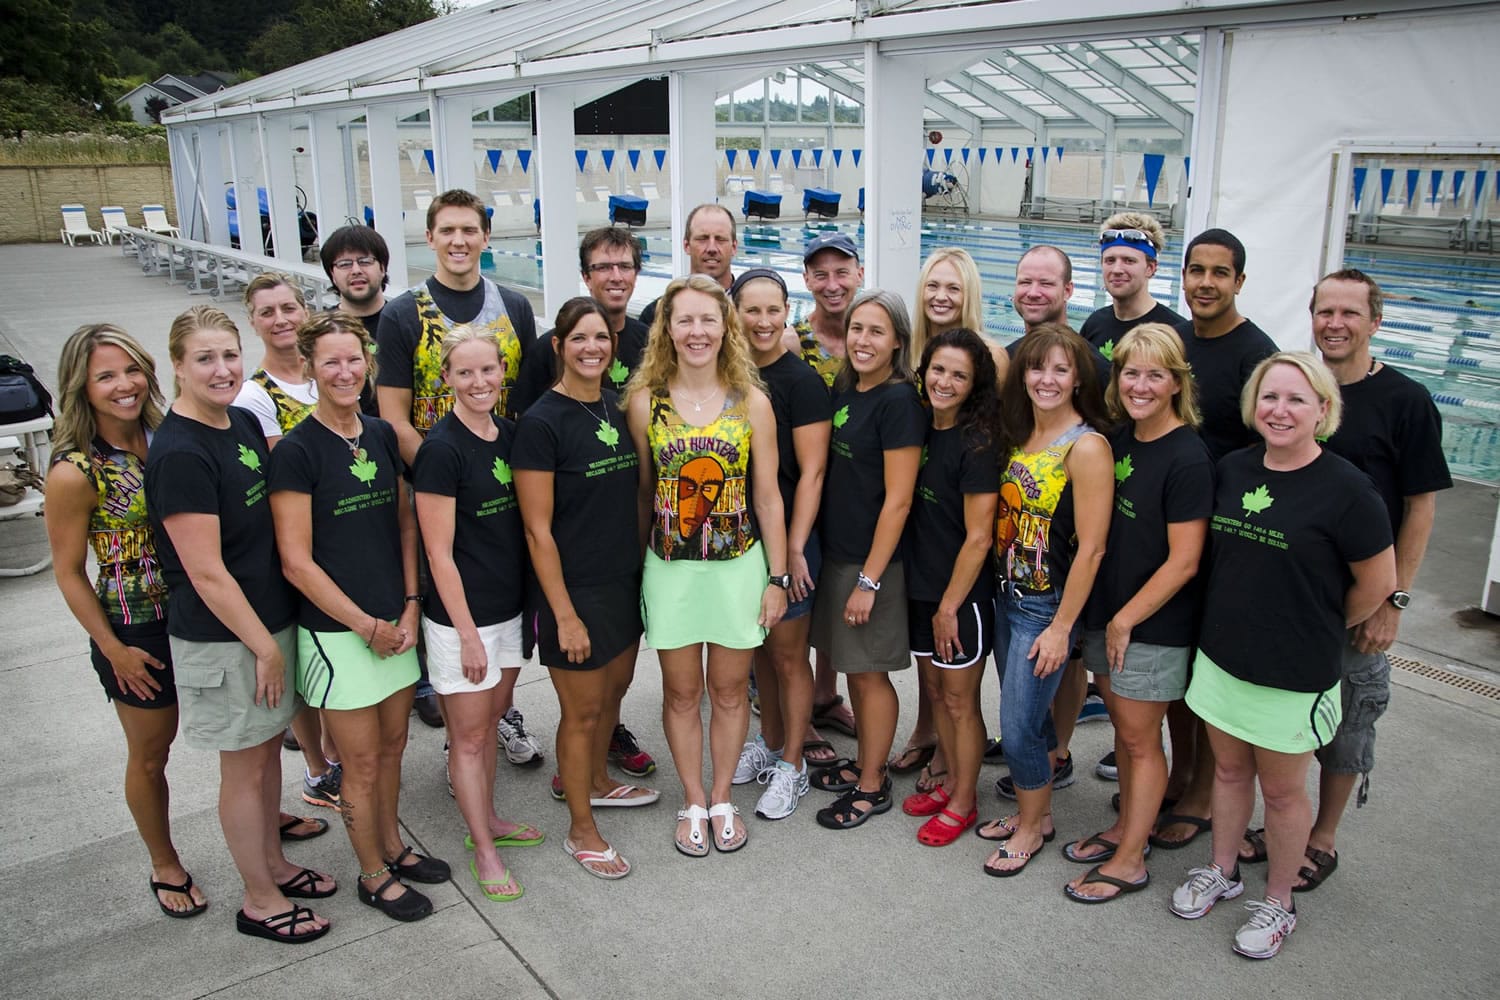 Members of the Lacamas Swim and Sport who have been training for Ironman in Canada, which is Sunday at Penticton, B.C.